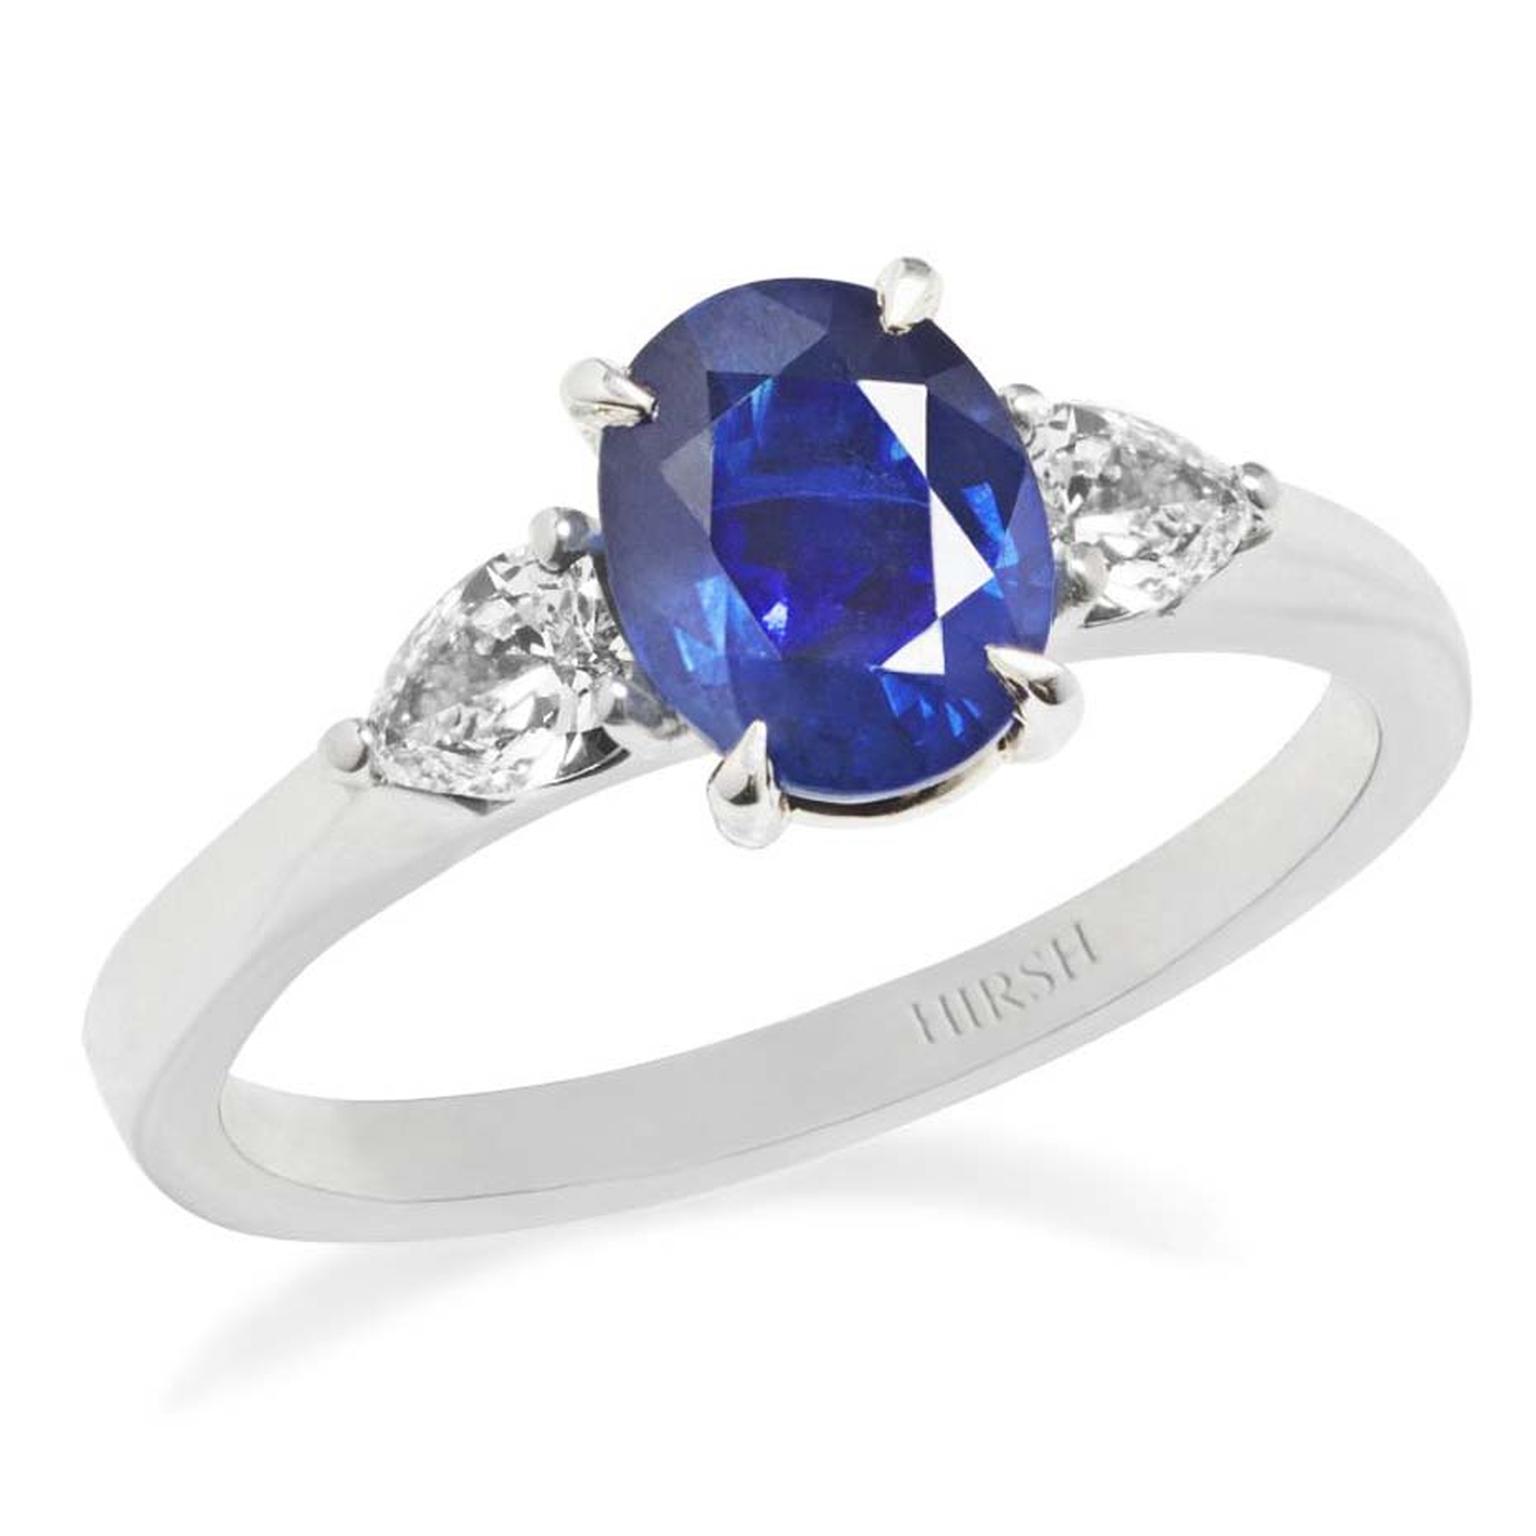 A blue sapphire ring with diamond side stones will never go out of fashion, like this Hirsh jewellery engagement ring with an oval-cut central sapphire, between two pear-shaped diamonds.